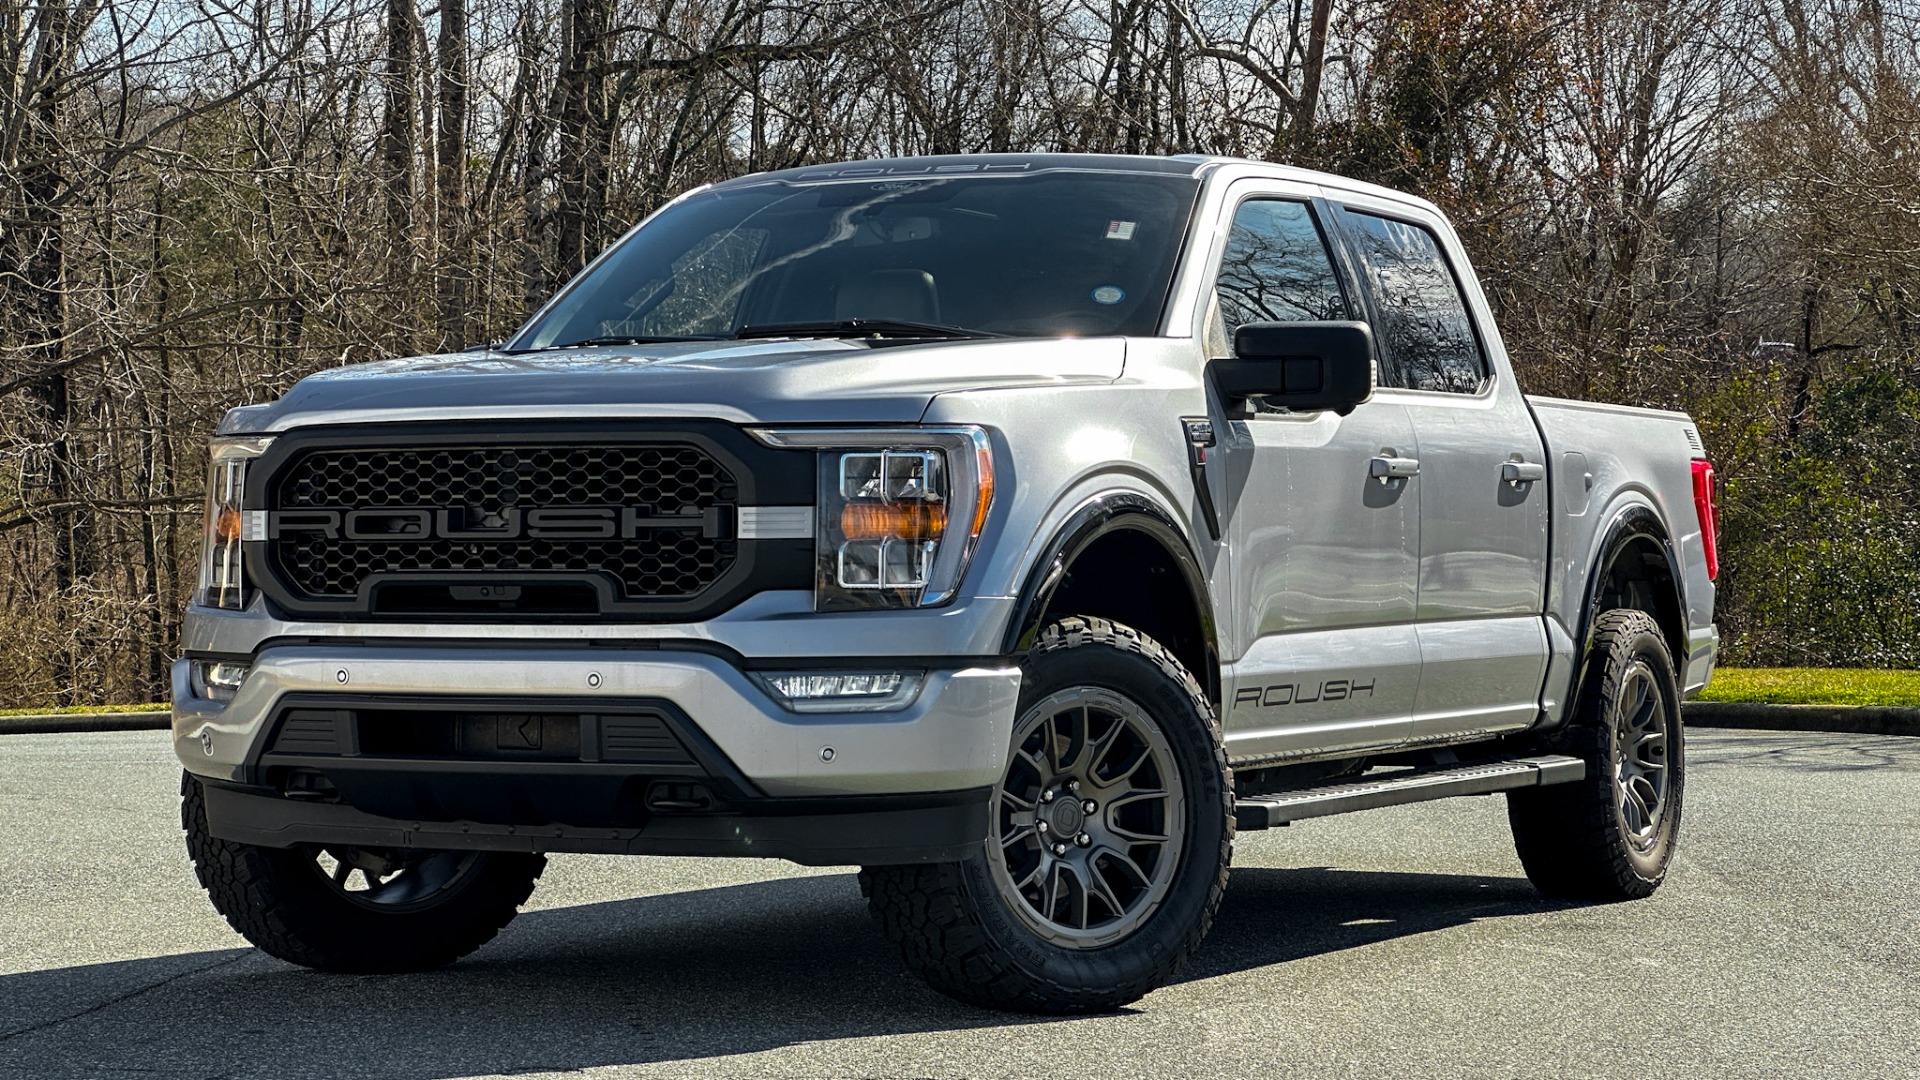 Used 2021 Ford F-150 ROUSH / 5.0 V8 / LEATHER / ACTIVE EXHAUST / FOX SHOCKS / CONSOLE SAFE for sale $69,985 at Formula Imports in Charlotte NC 28227 1